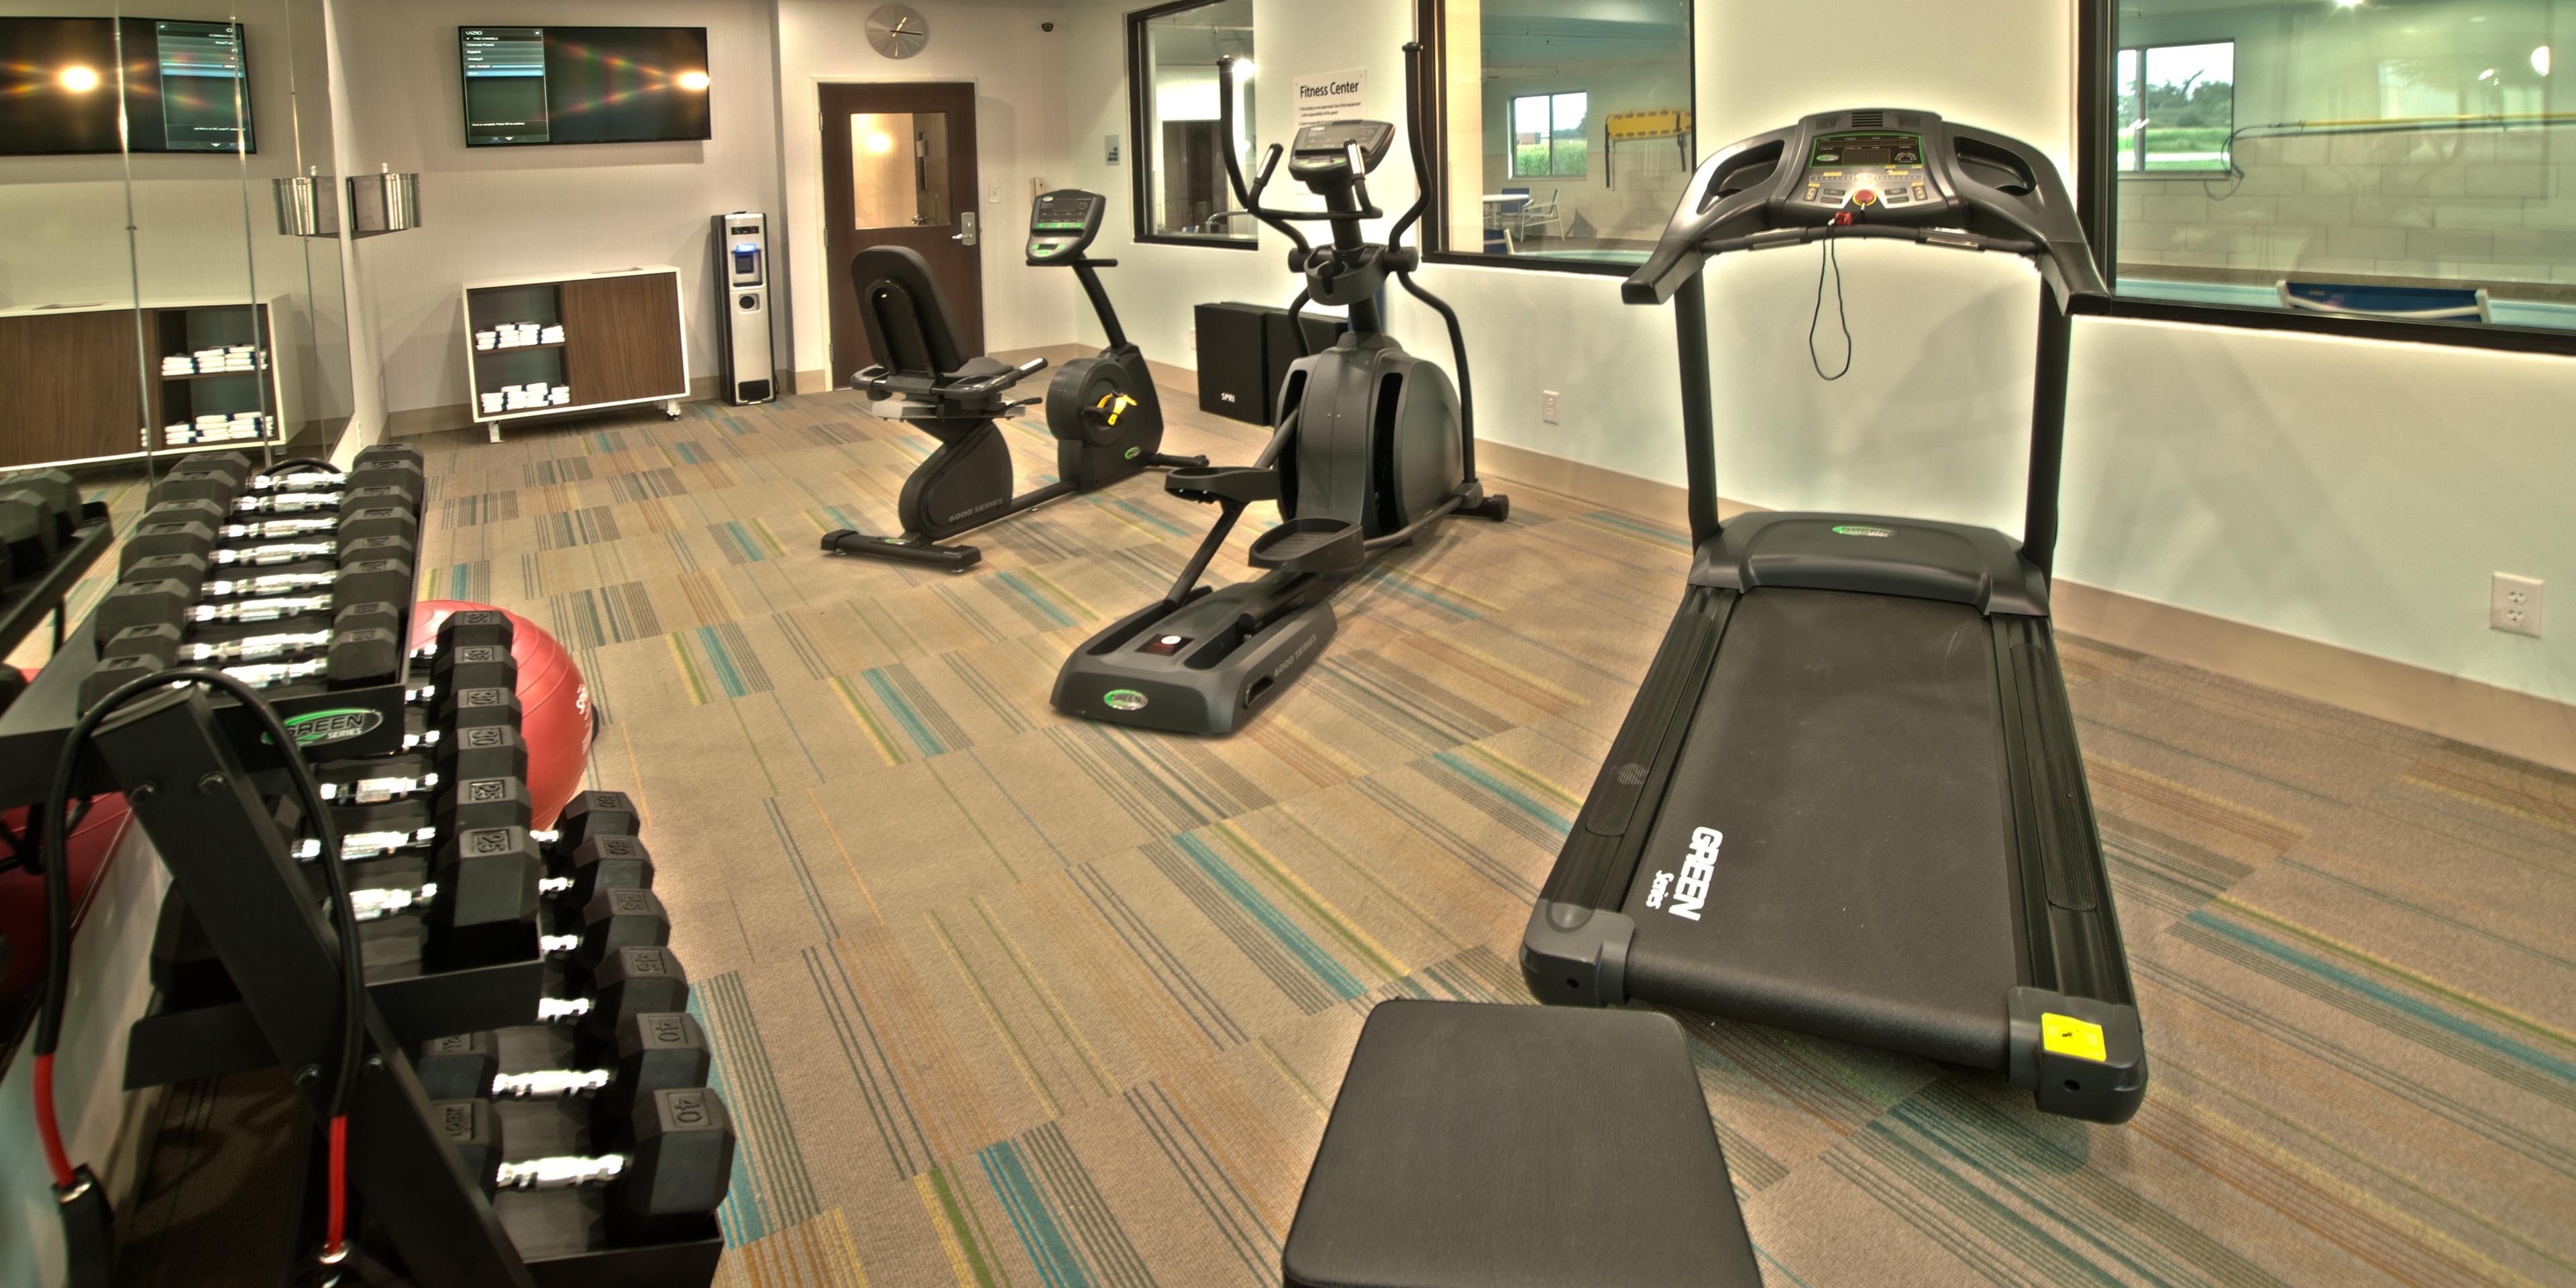 Need to workout after a long day.  Our gym has everything you need for a great workout.